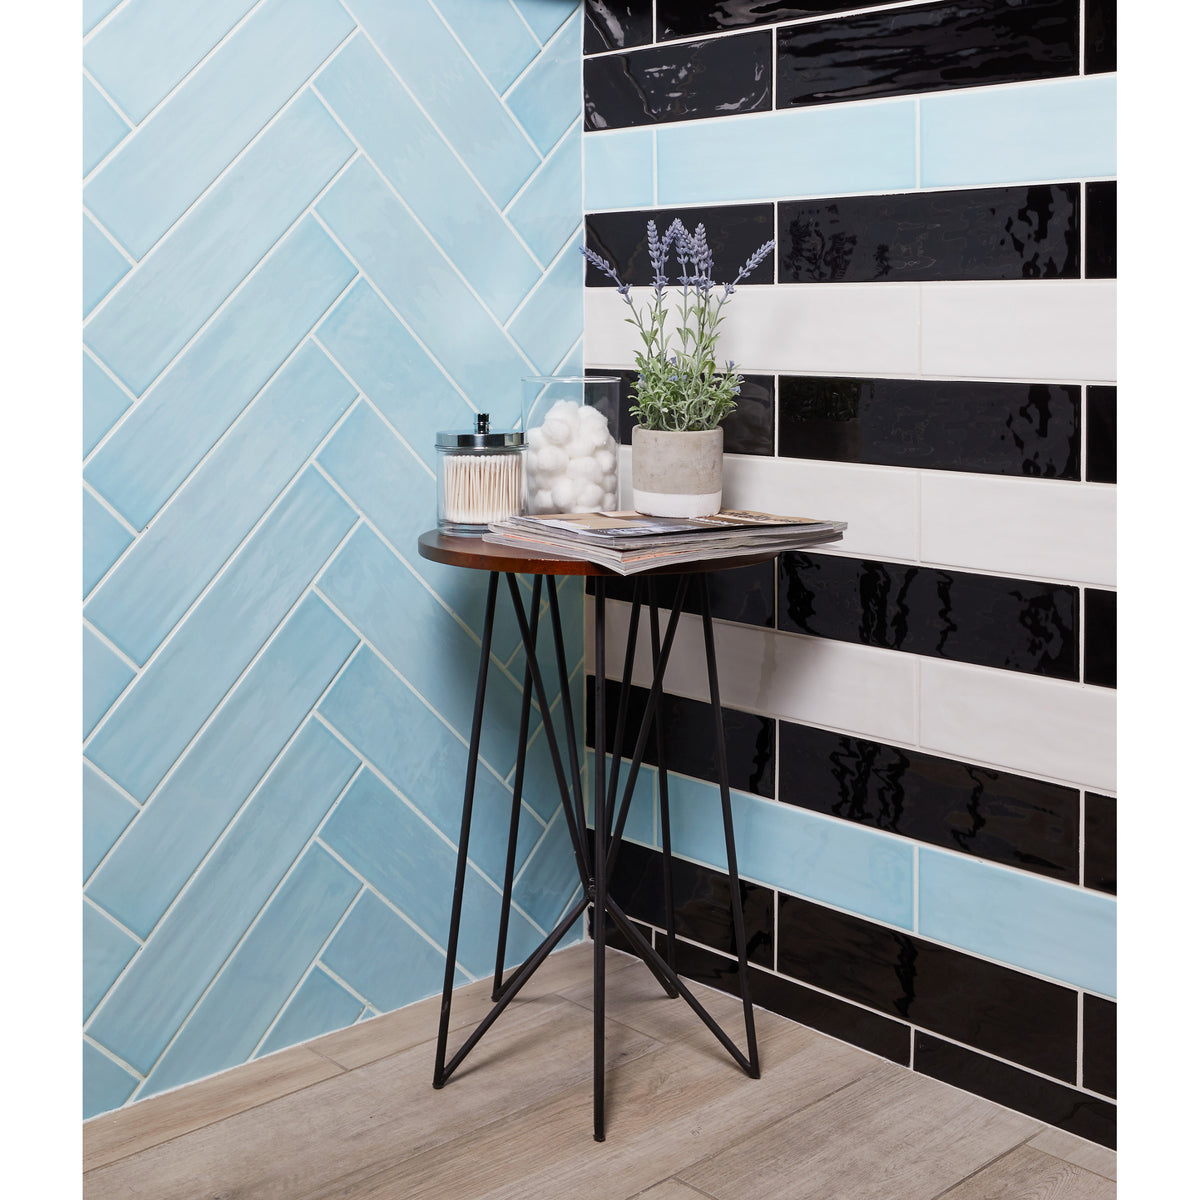 Arizona Tile - Gioia Series 4&quot; x 16&quot; Porcelain Wall Tile - Sky Wall Install